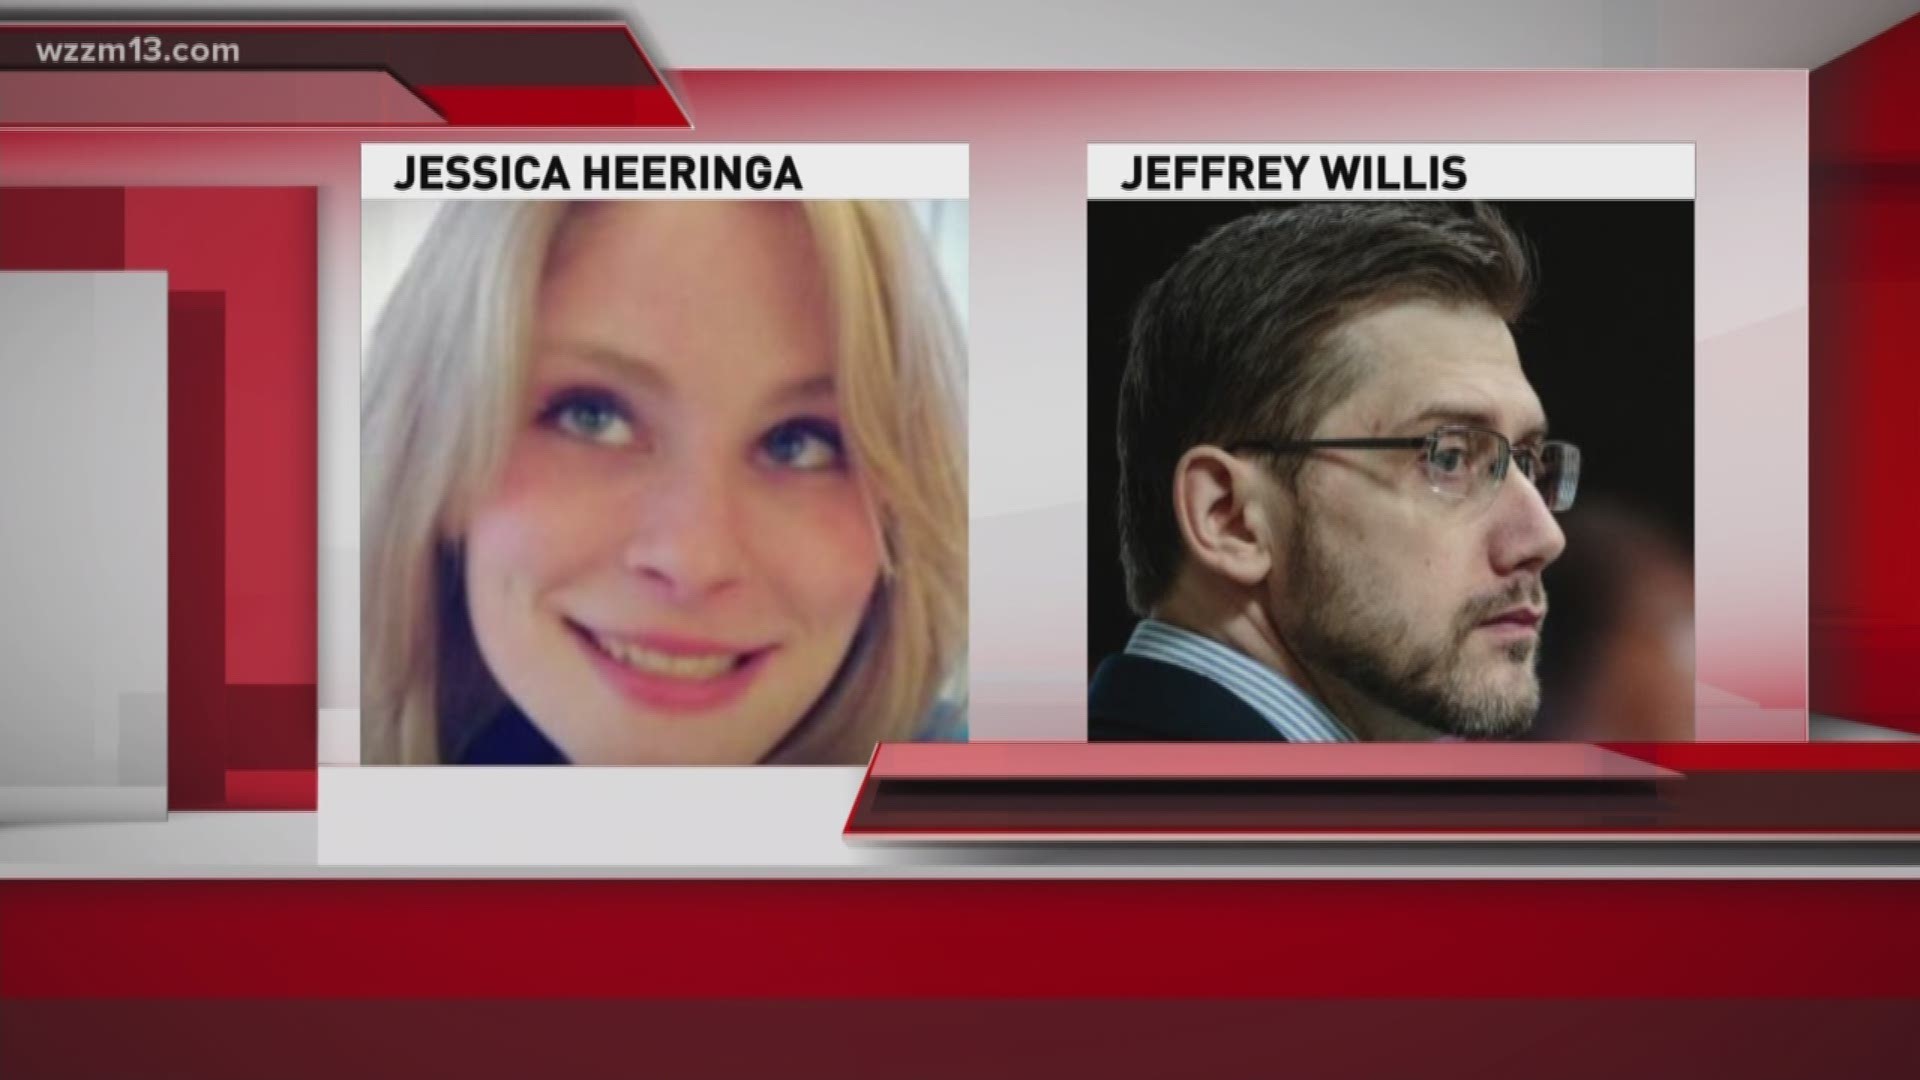 Trial set for the murder and kidnapping of Jessica Heeringa